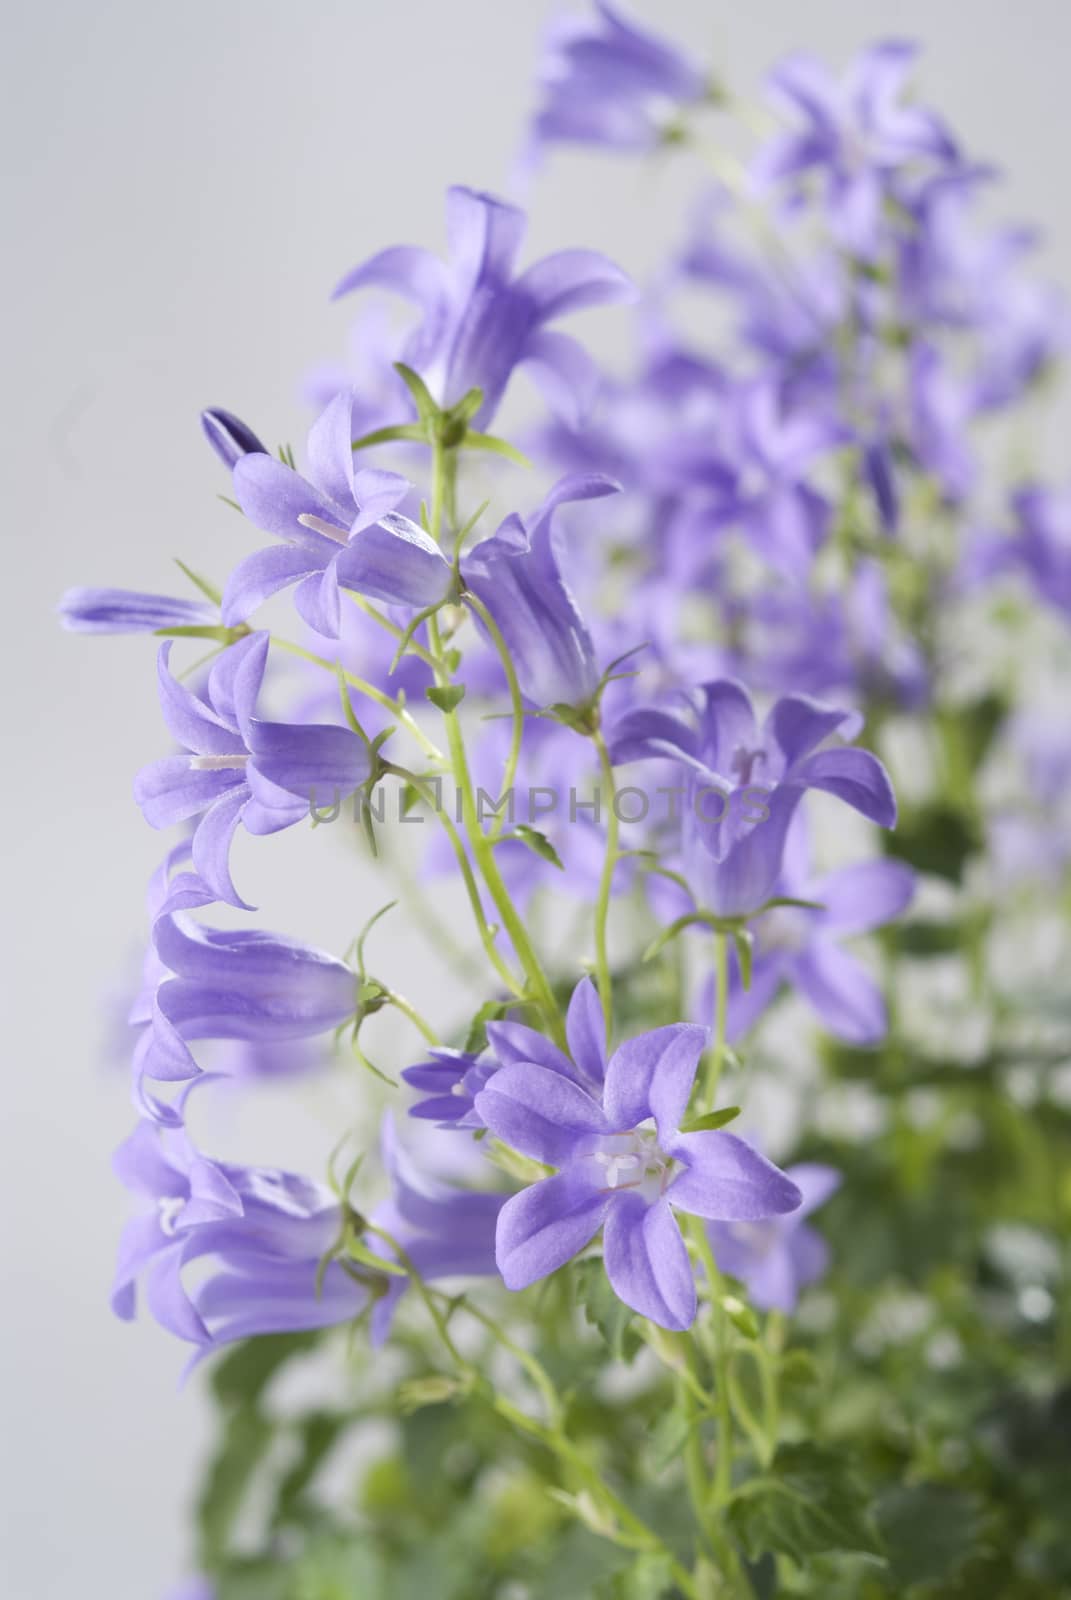 Campanula bell flowers on the grey background